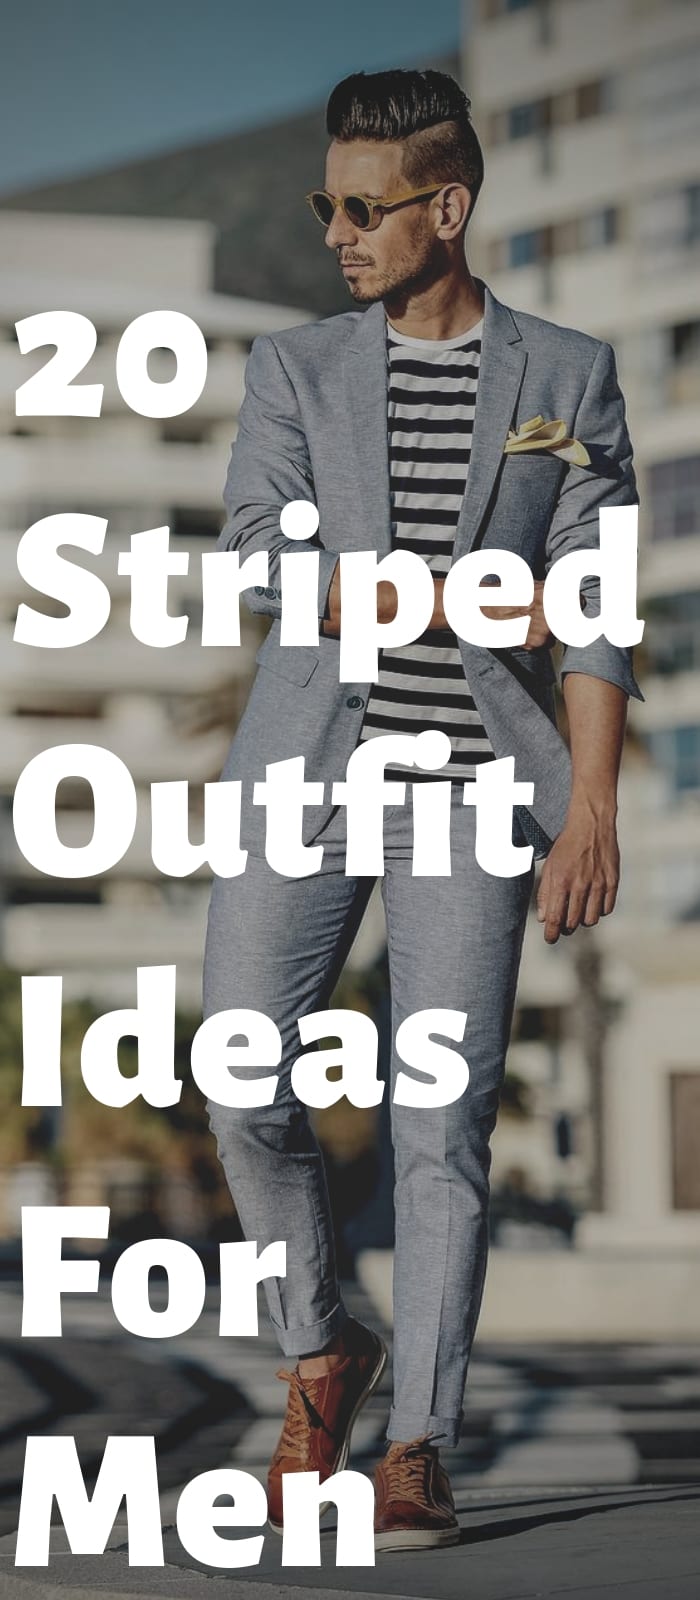 20 Striped Outfit Ideas For Men!